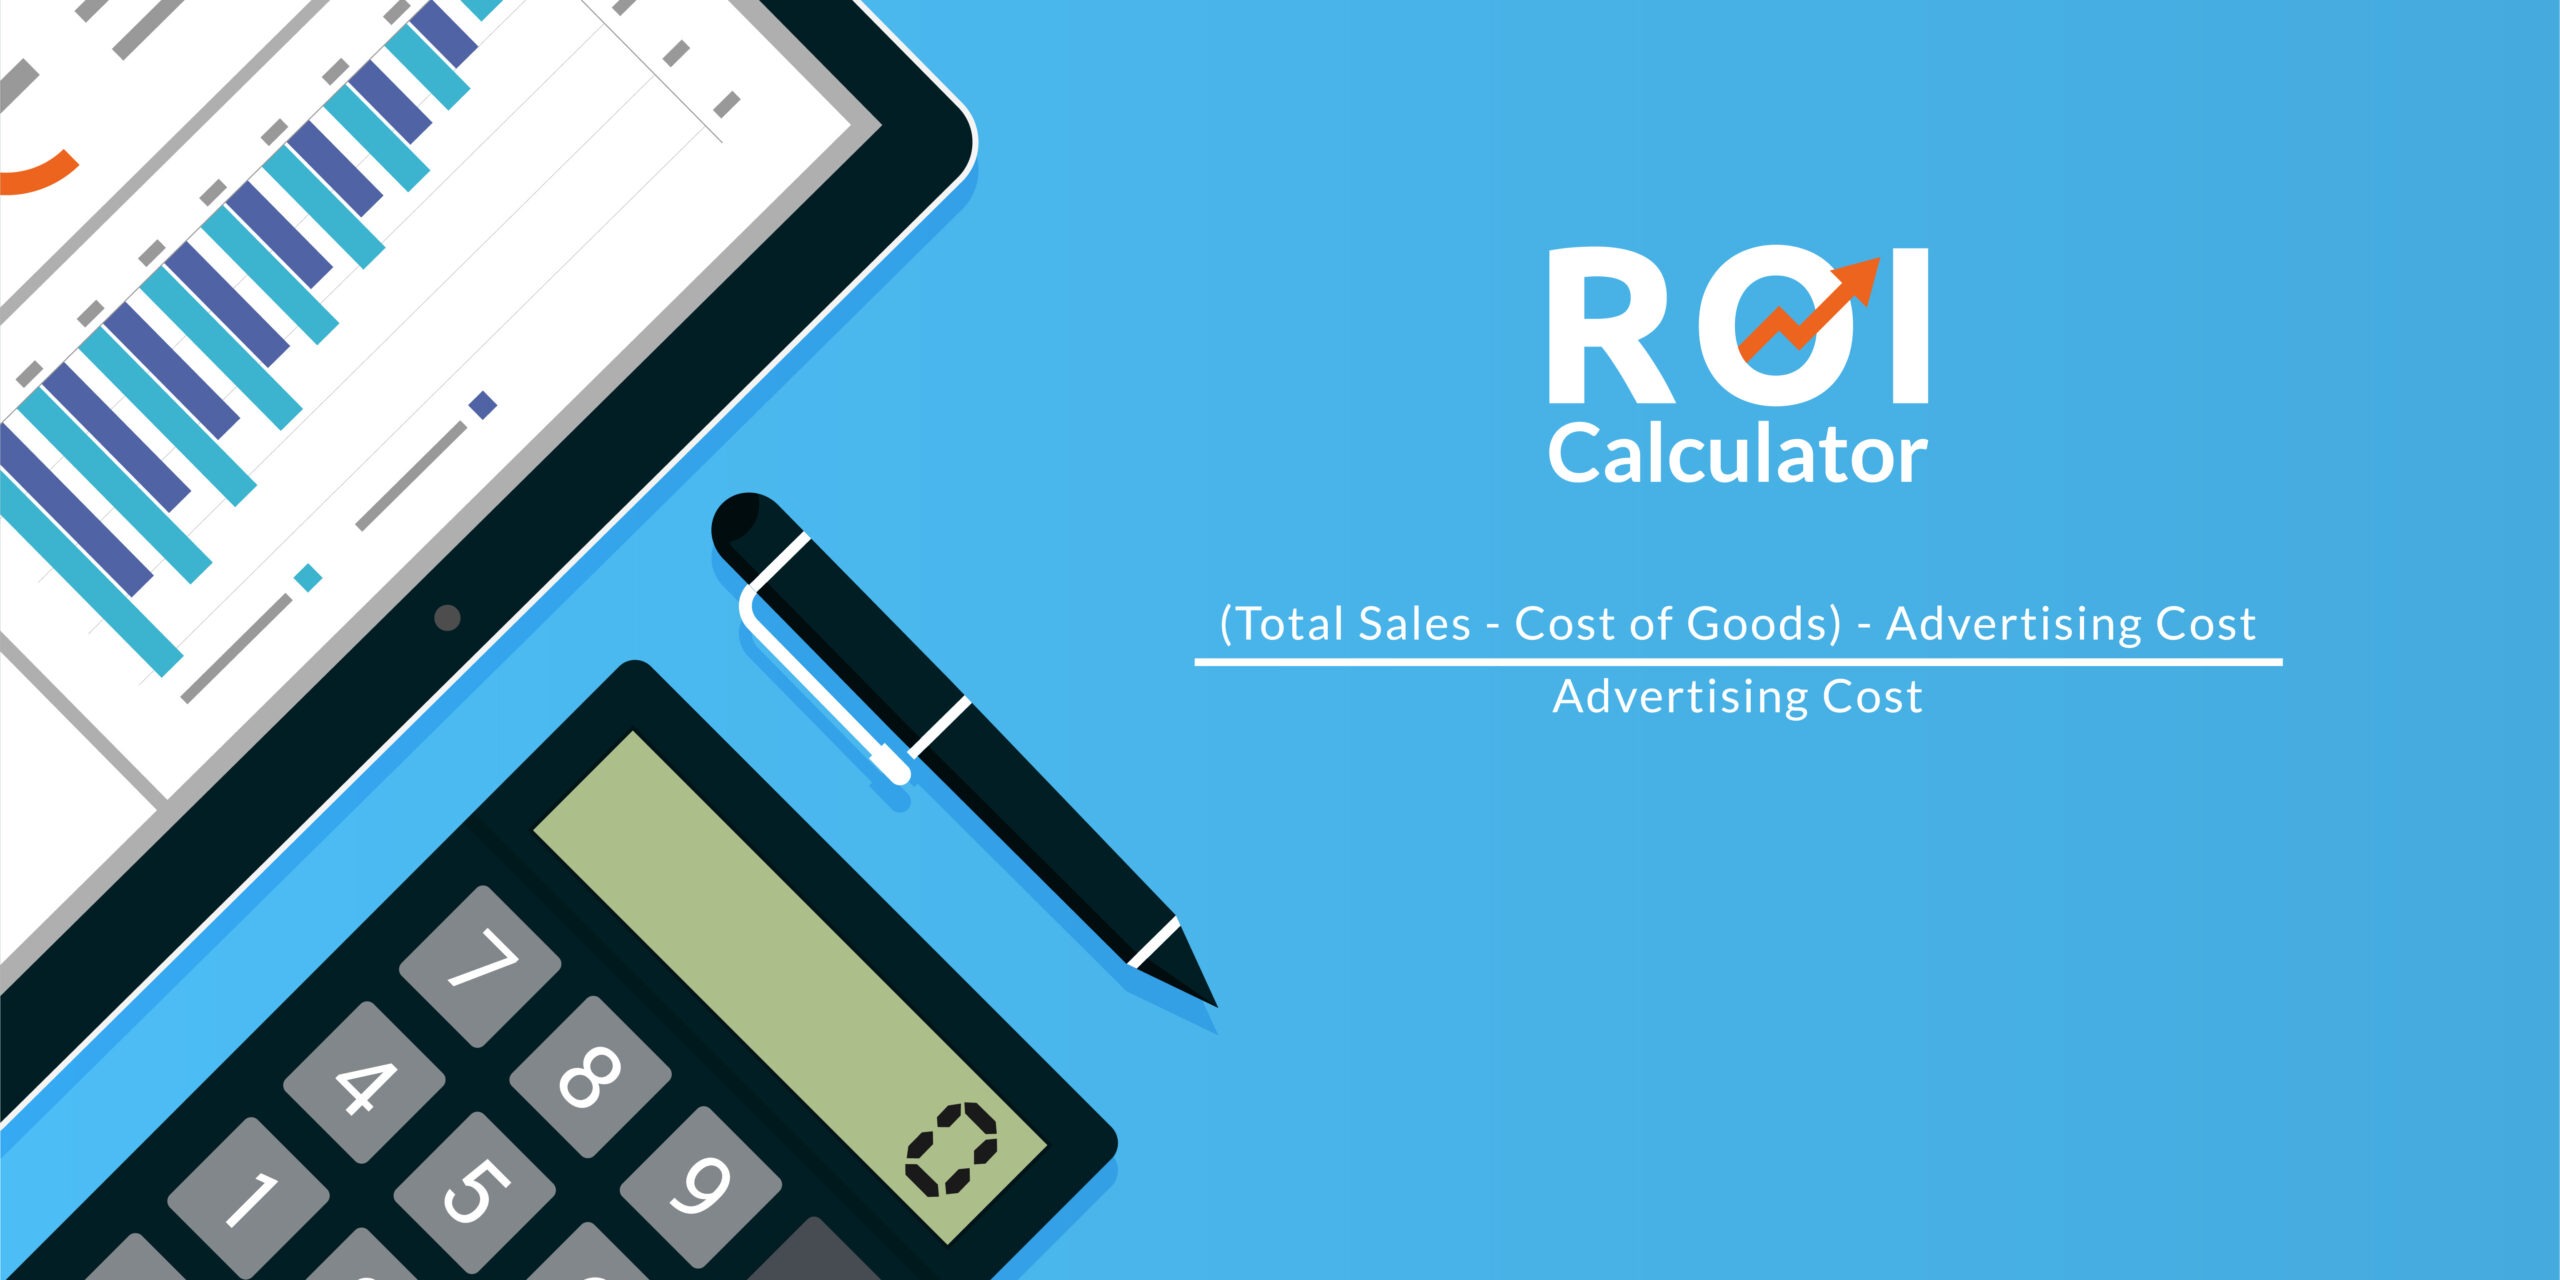 A graphic of a calculator, a pen, and graph with the word "ROI" and the words "Return on investment" below it.